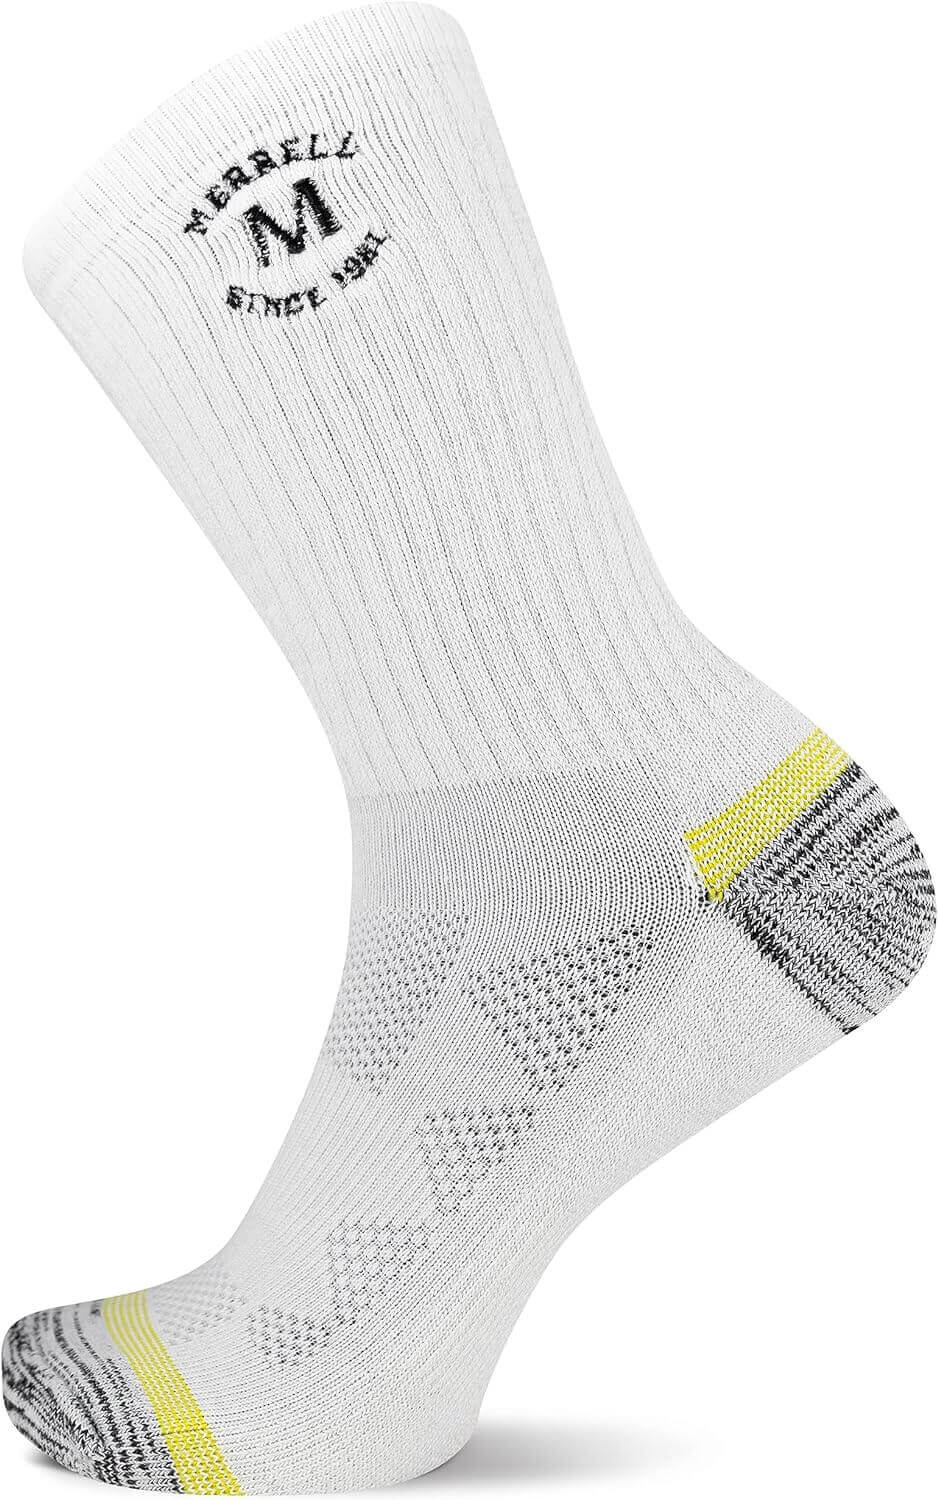 Shop The Latest >Merrell Men's and Women's Moab Hiking Mid Cushion Socks > *Only $25.20*> From The Top Brand > *Merrelll* > Shop Now and Get Free Shipping On Orders Over $45.00 >*Shop Earth Foot*